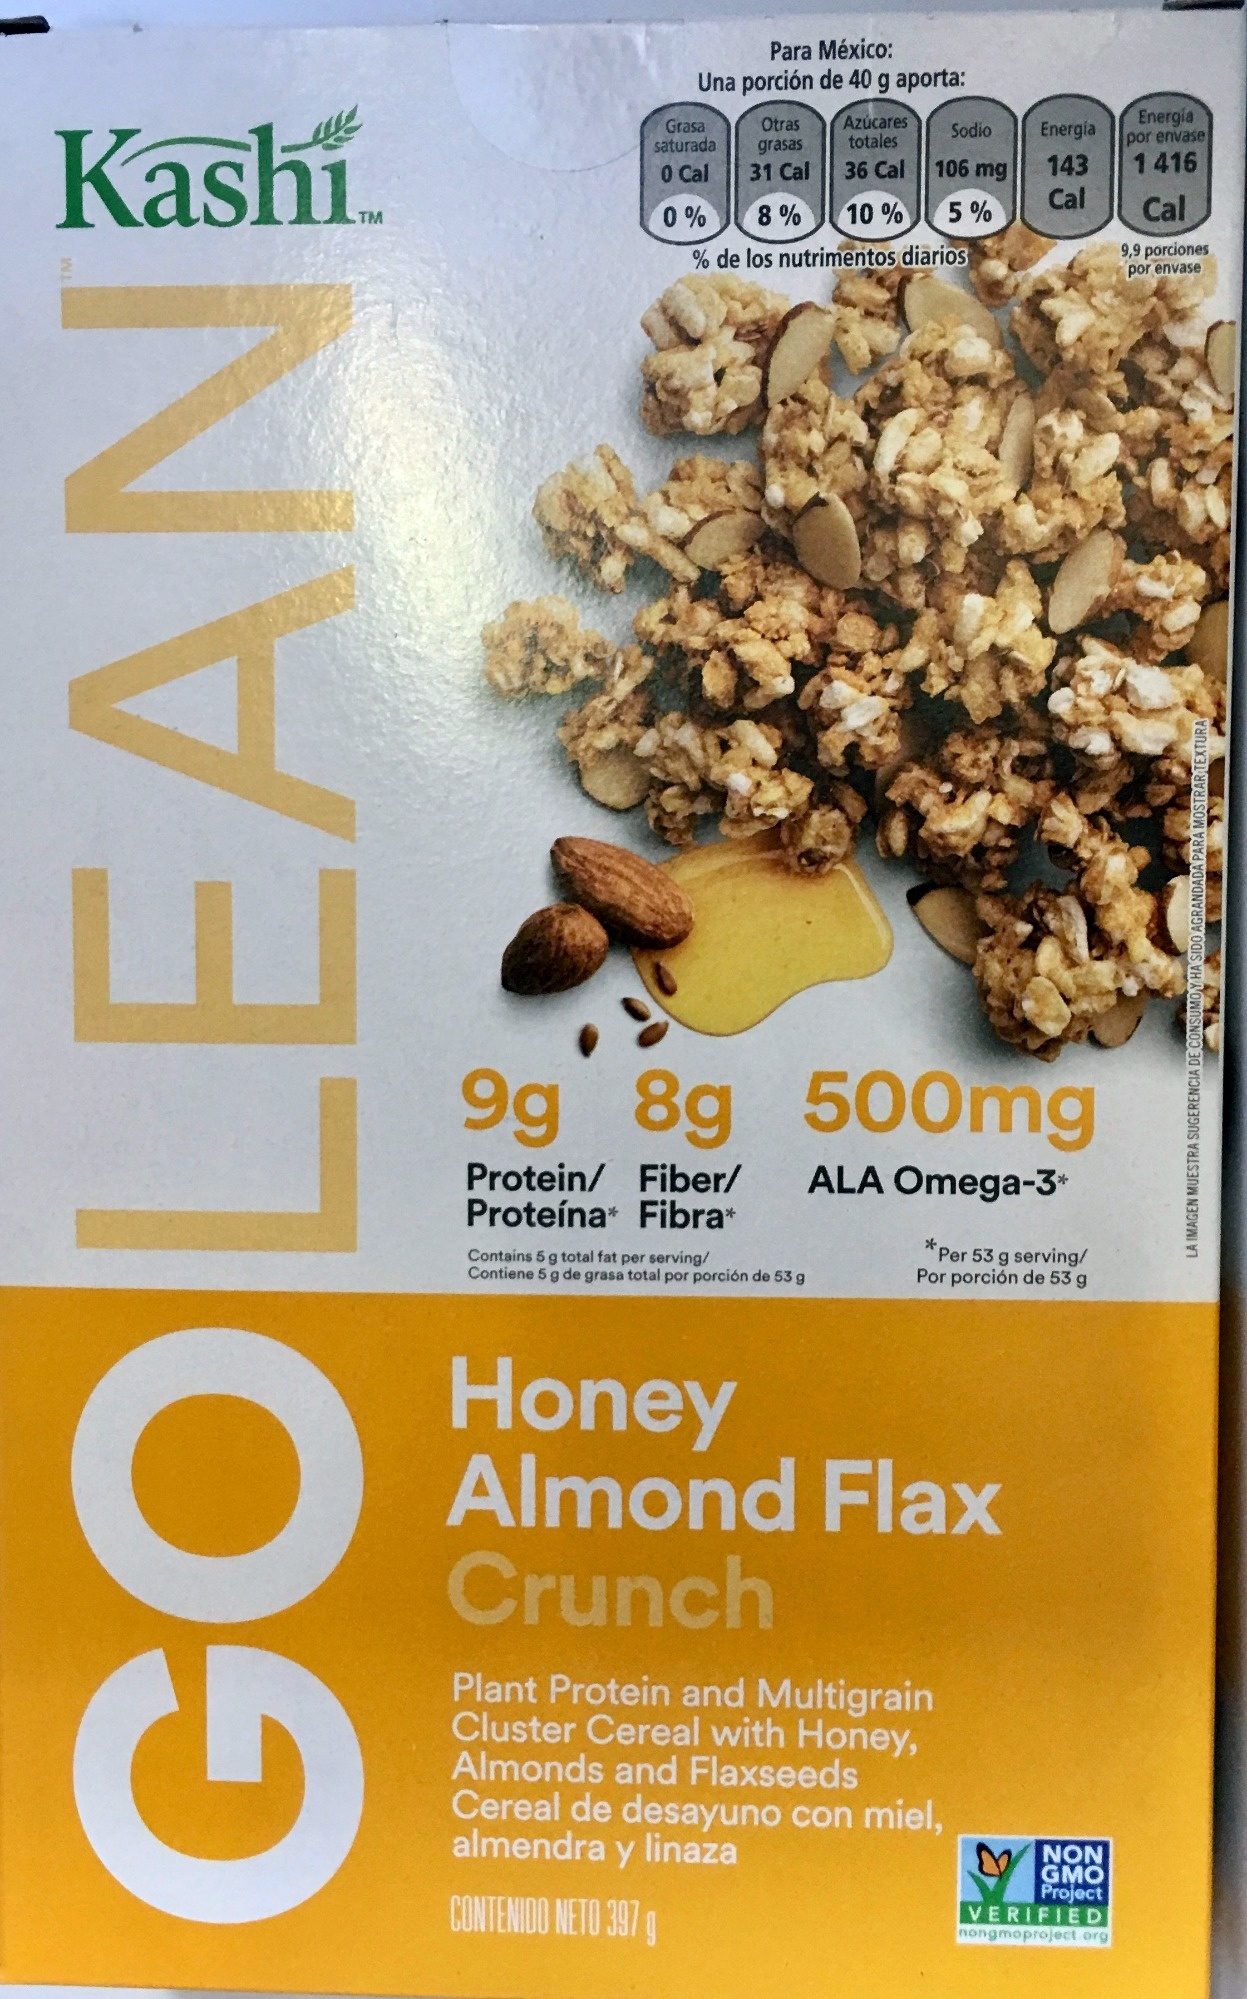 Go honey almond flax crunch breakfast cereal - Producto